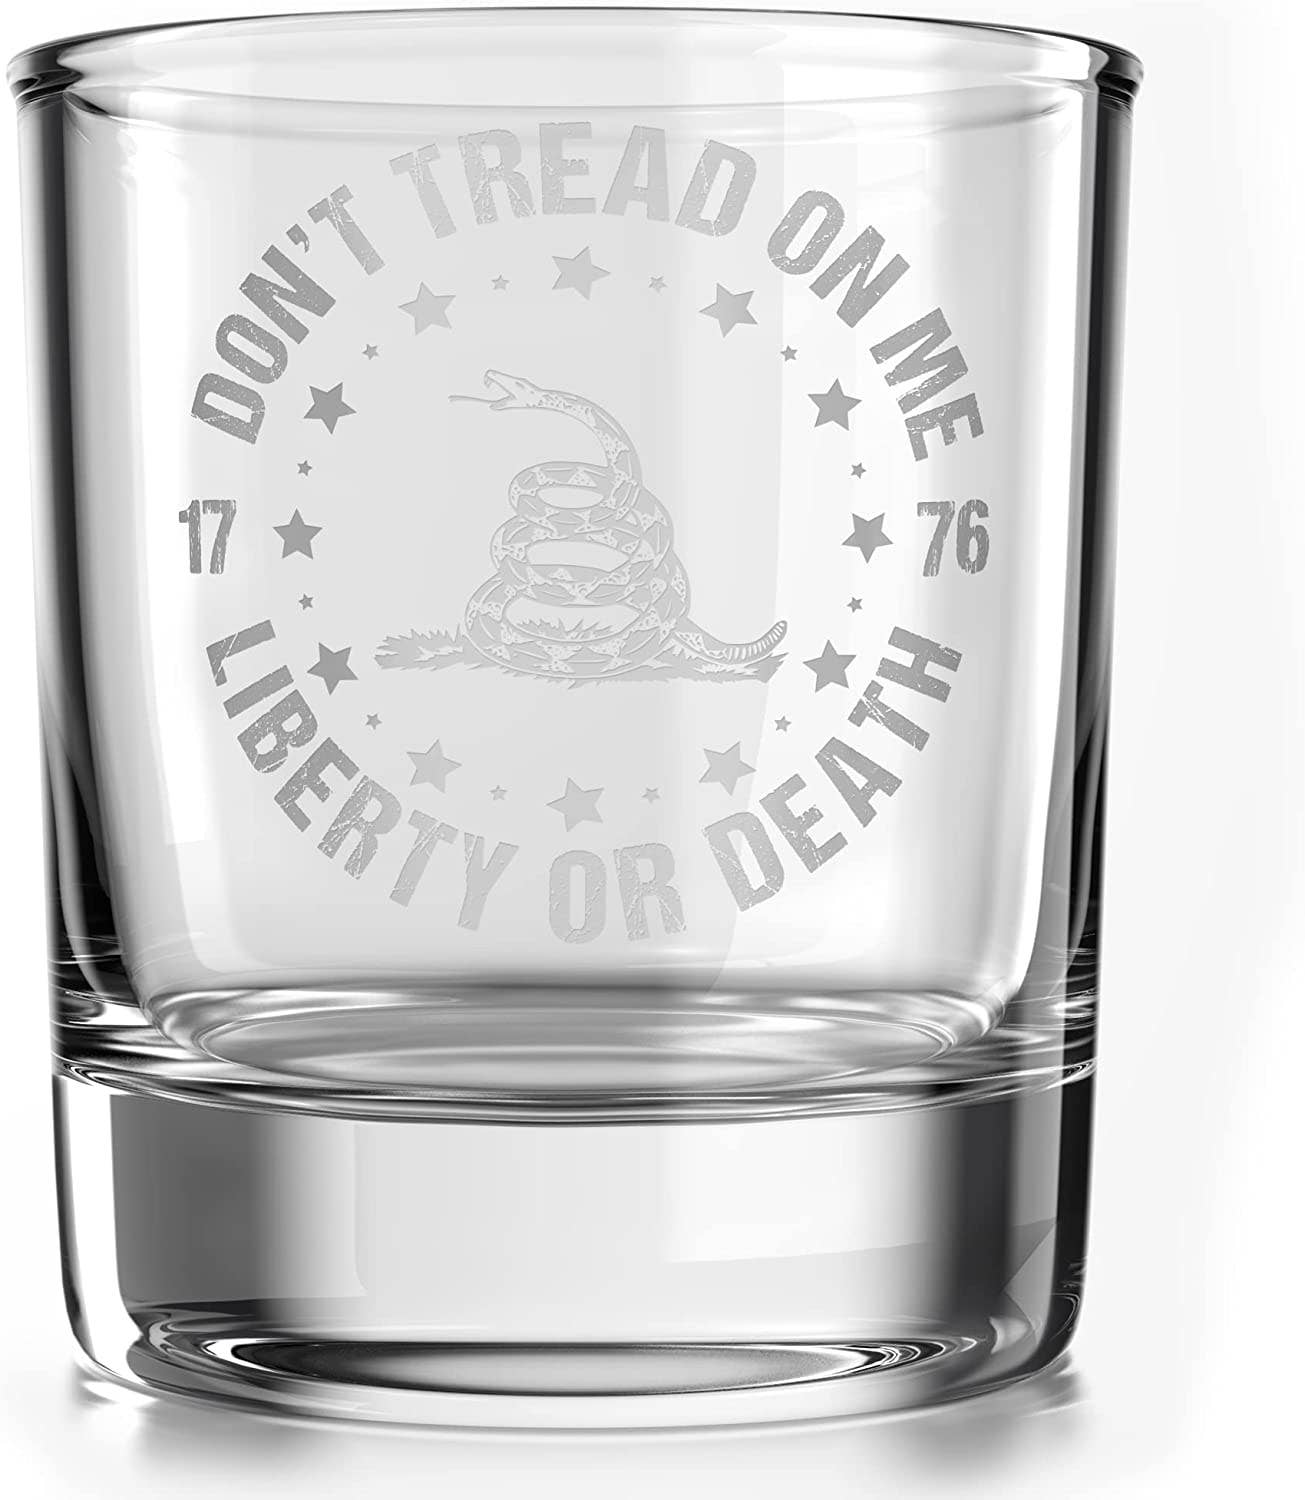 Don't Tread On Me Whiskey Glass